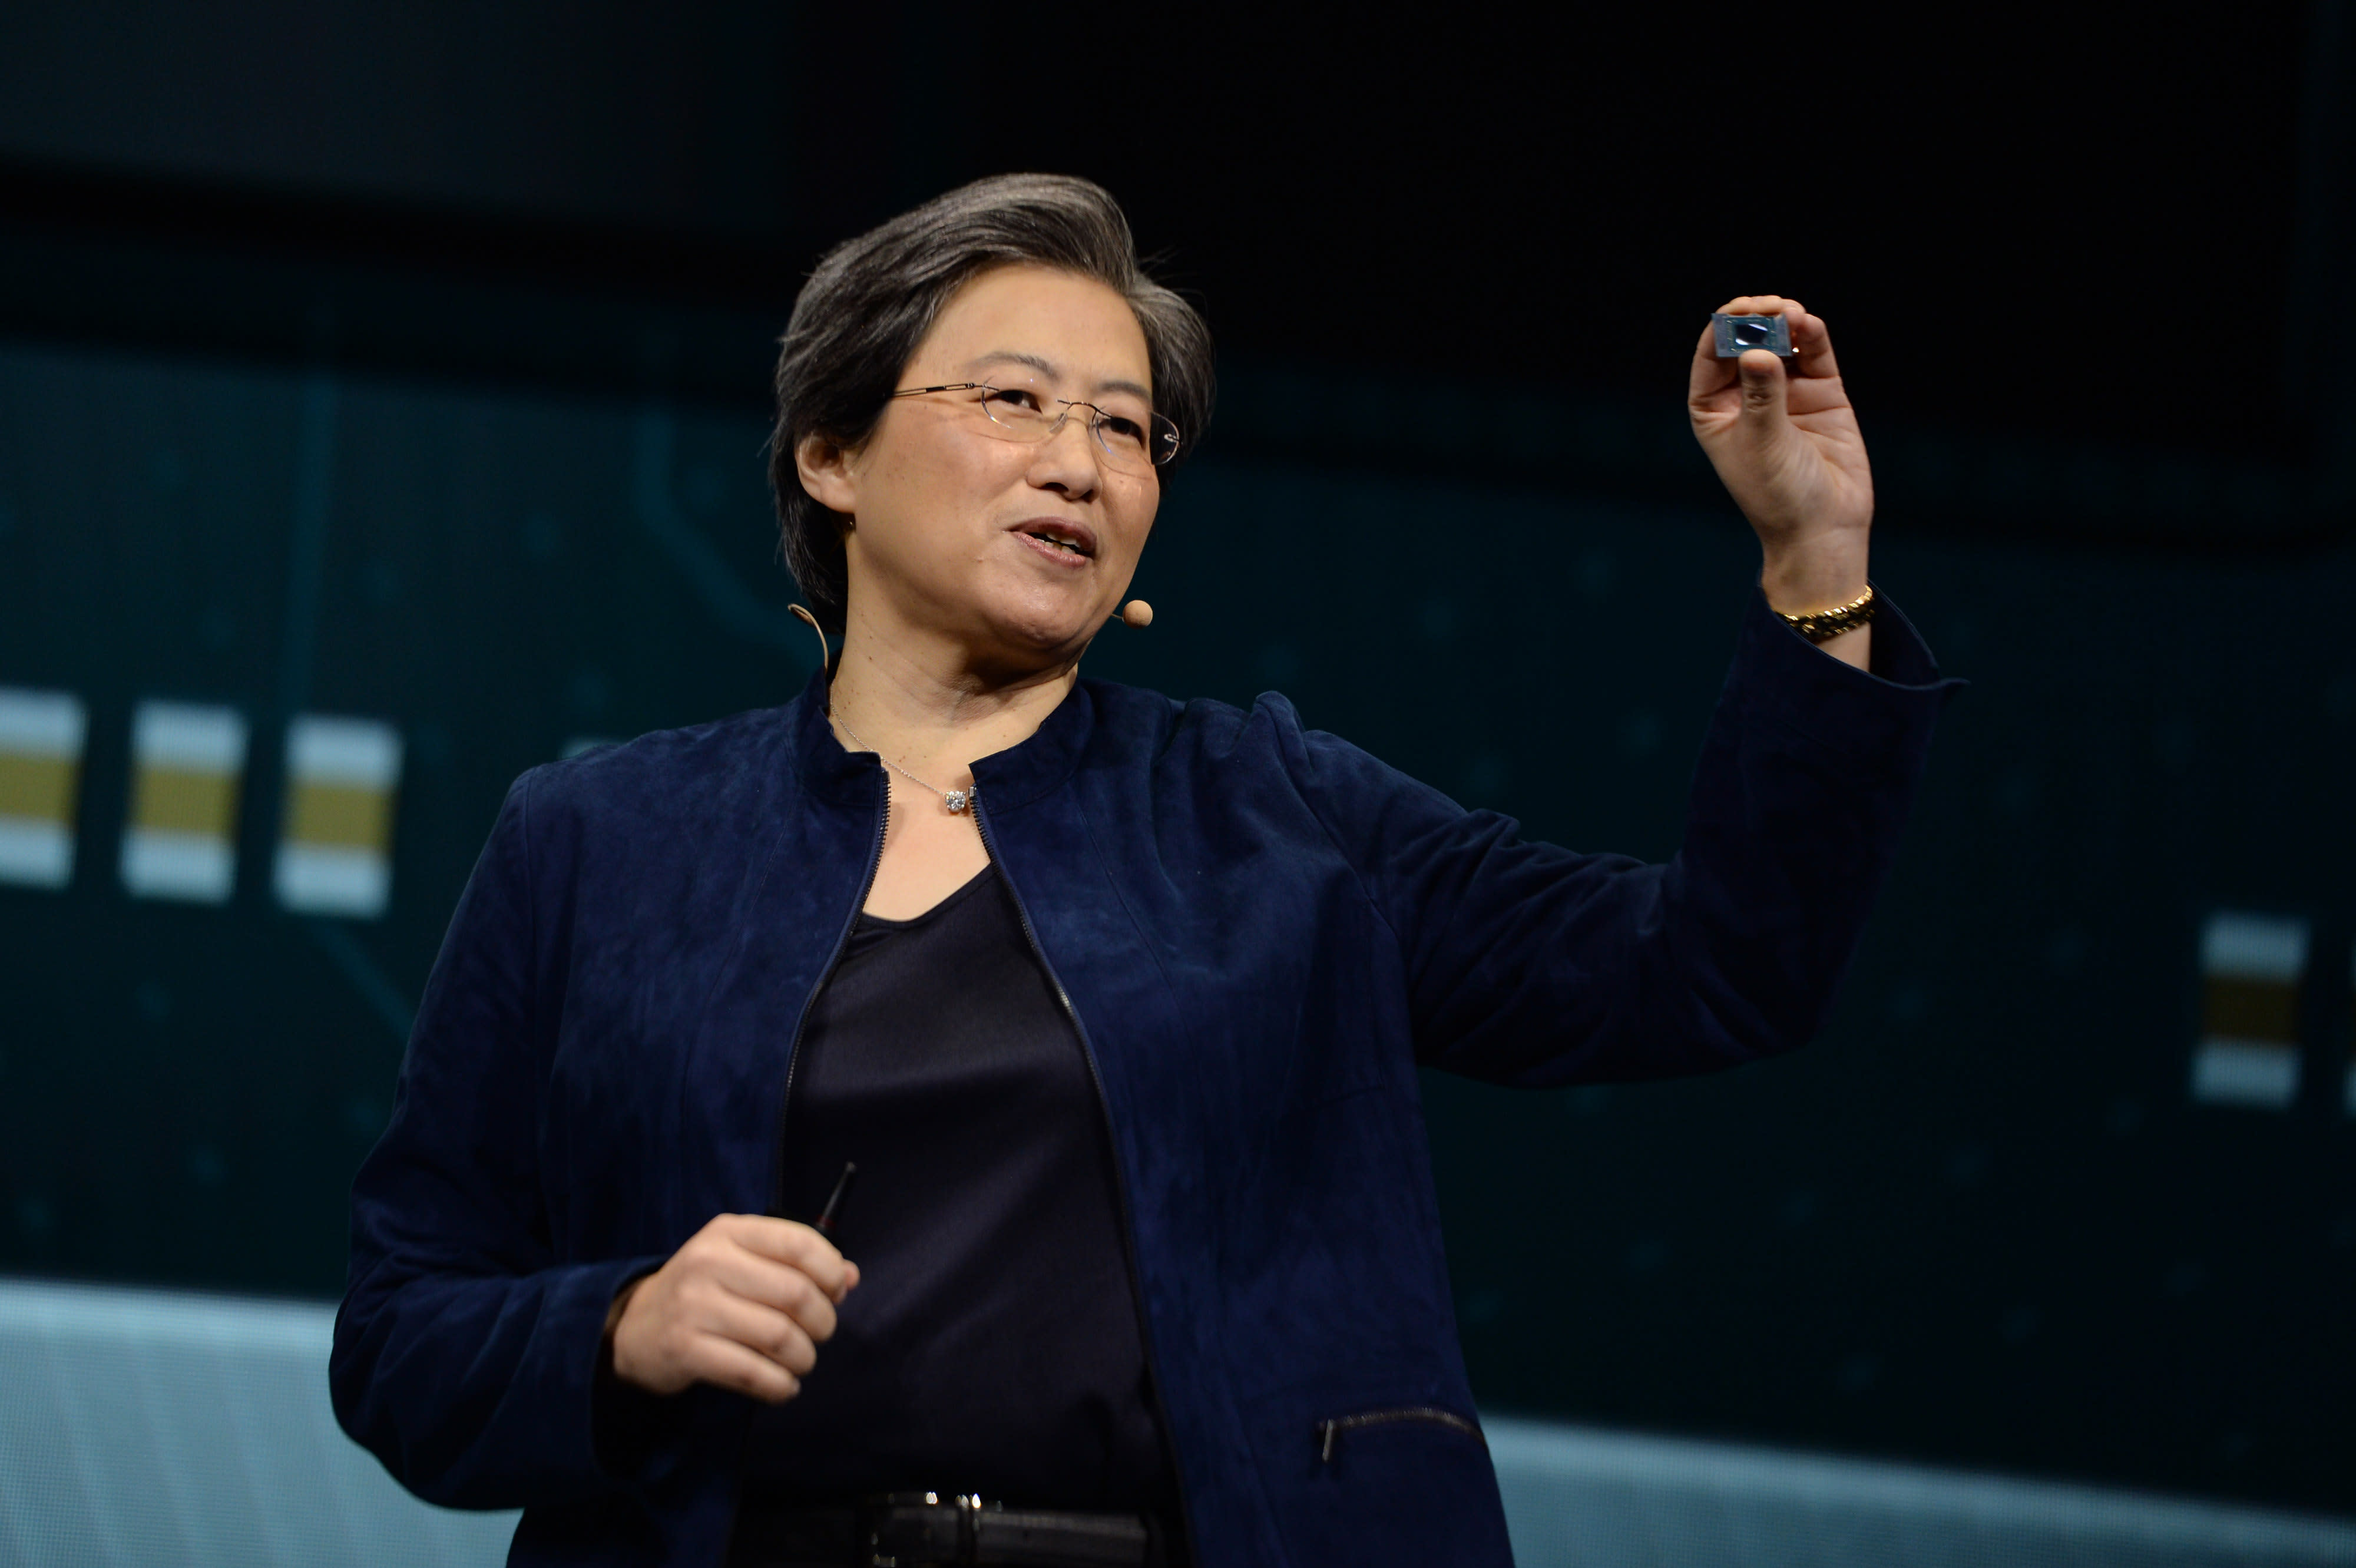 AMD delivers Q4 rhythms amidst industry headwinds, validating the Club's investment case